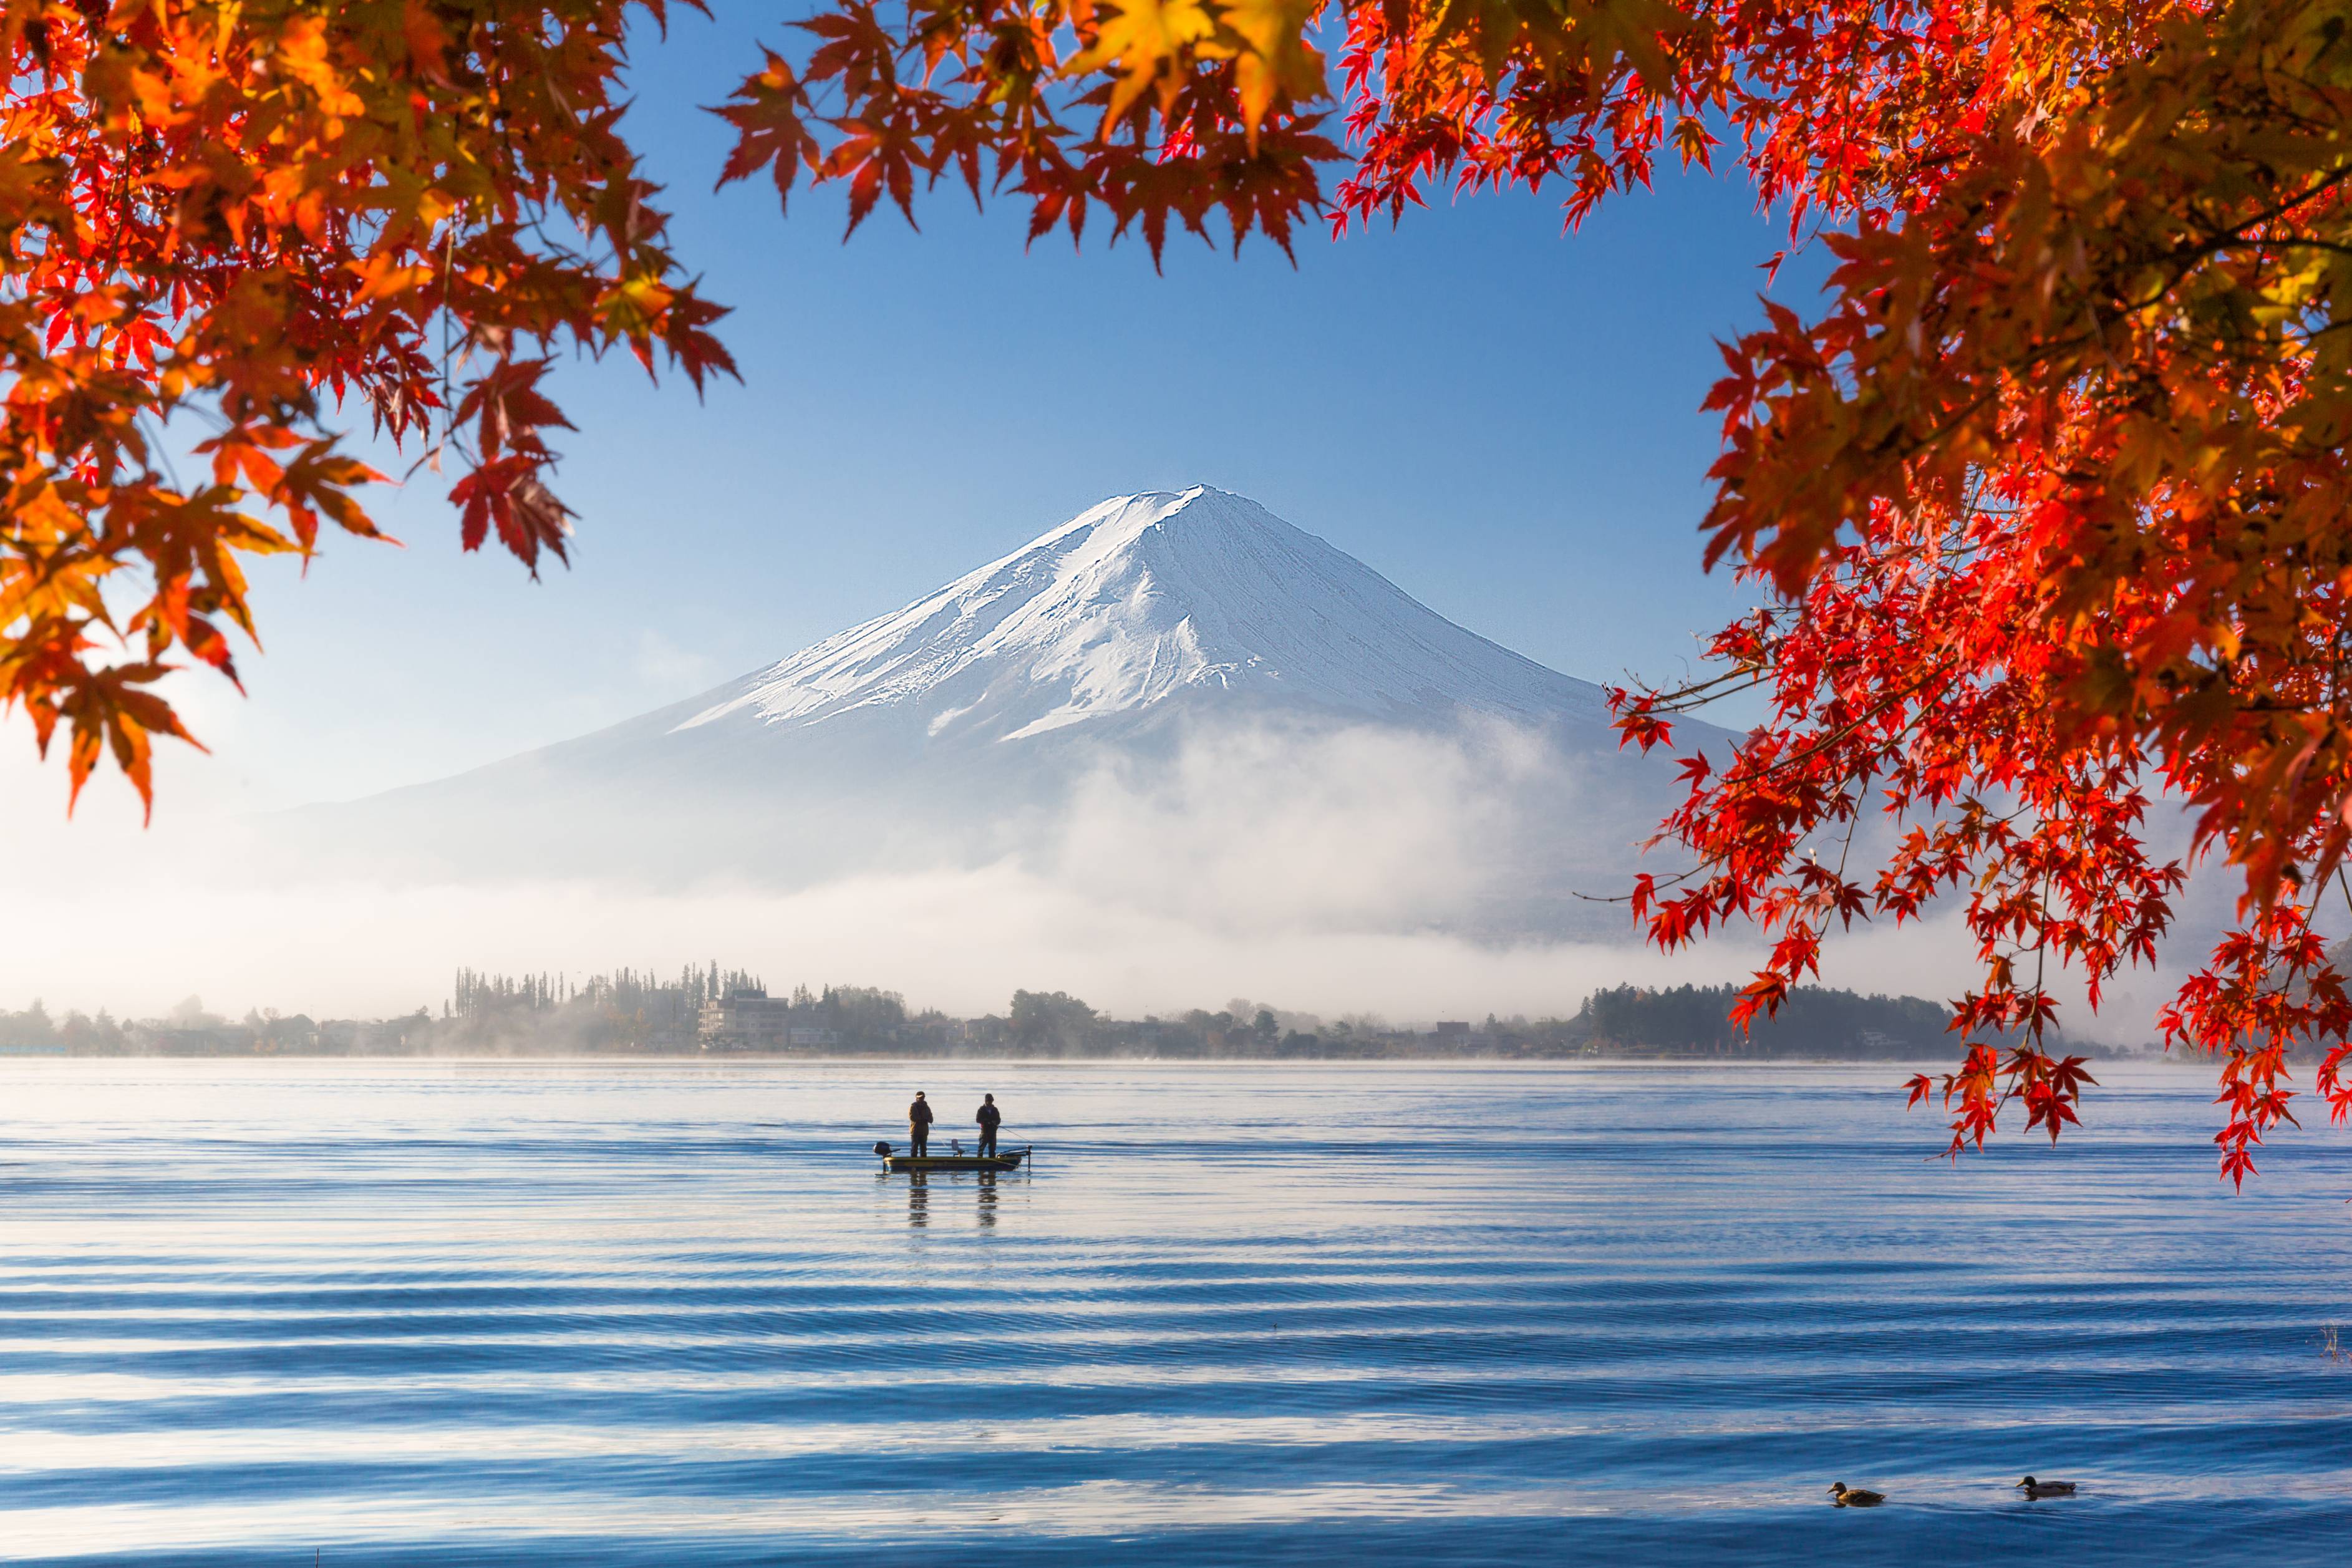 Fuji and red maple leaves at the lake